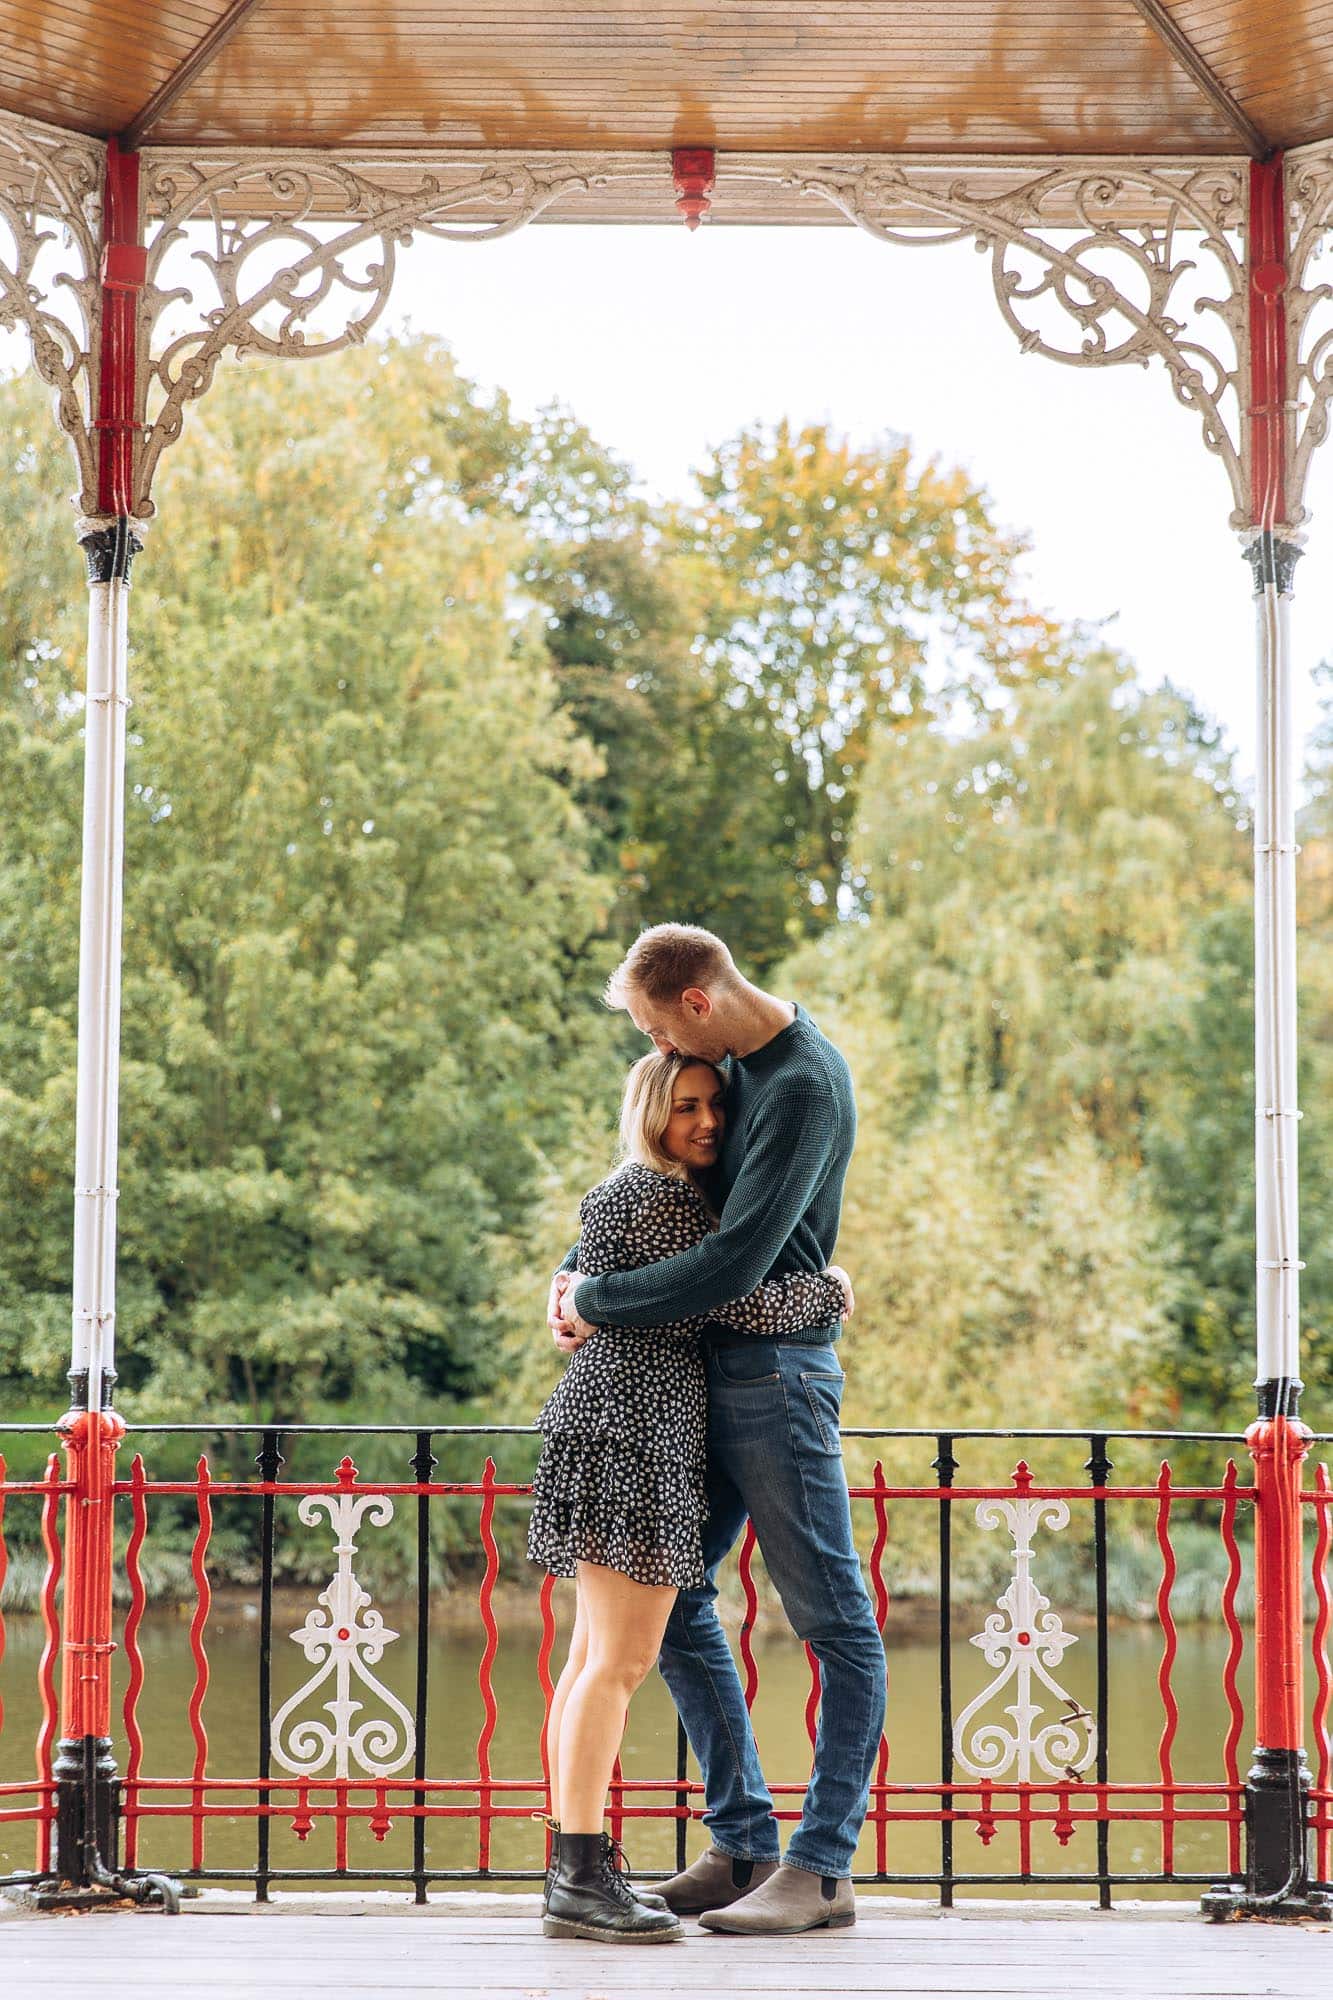 Sophie and glen on their engagement photoshoot in the historic town of chester